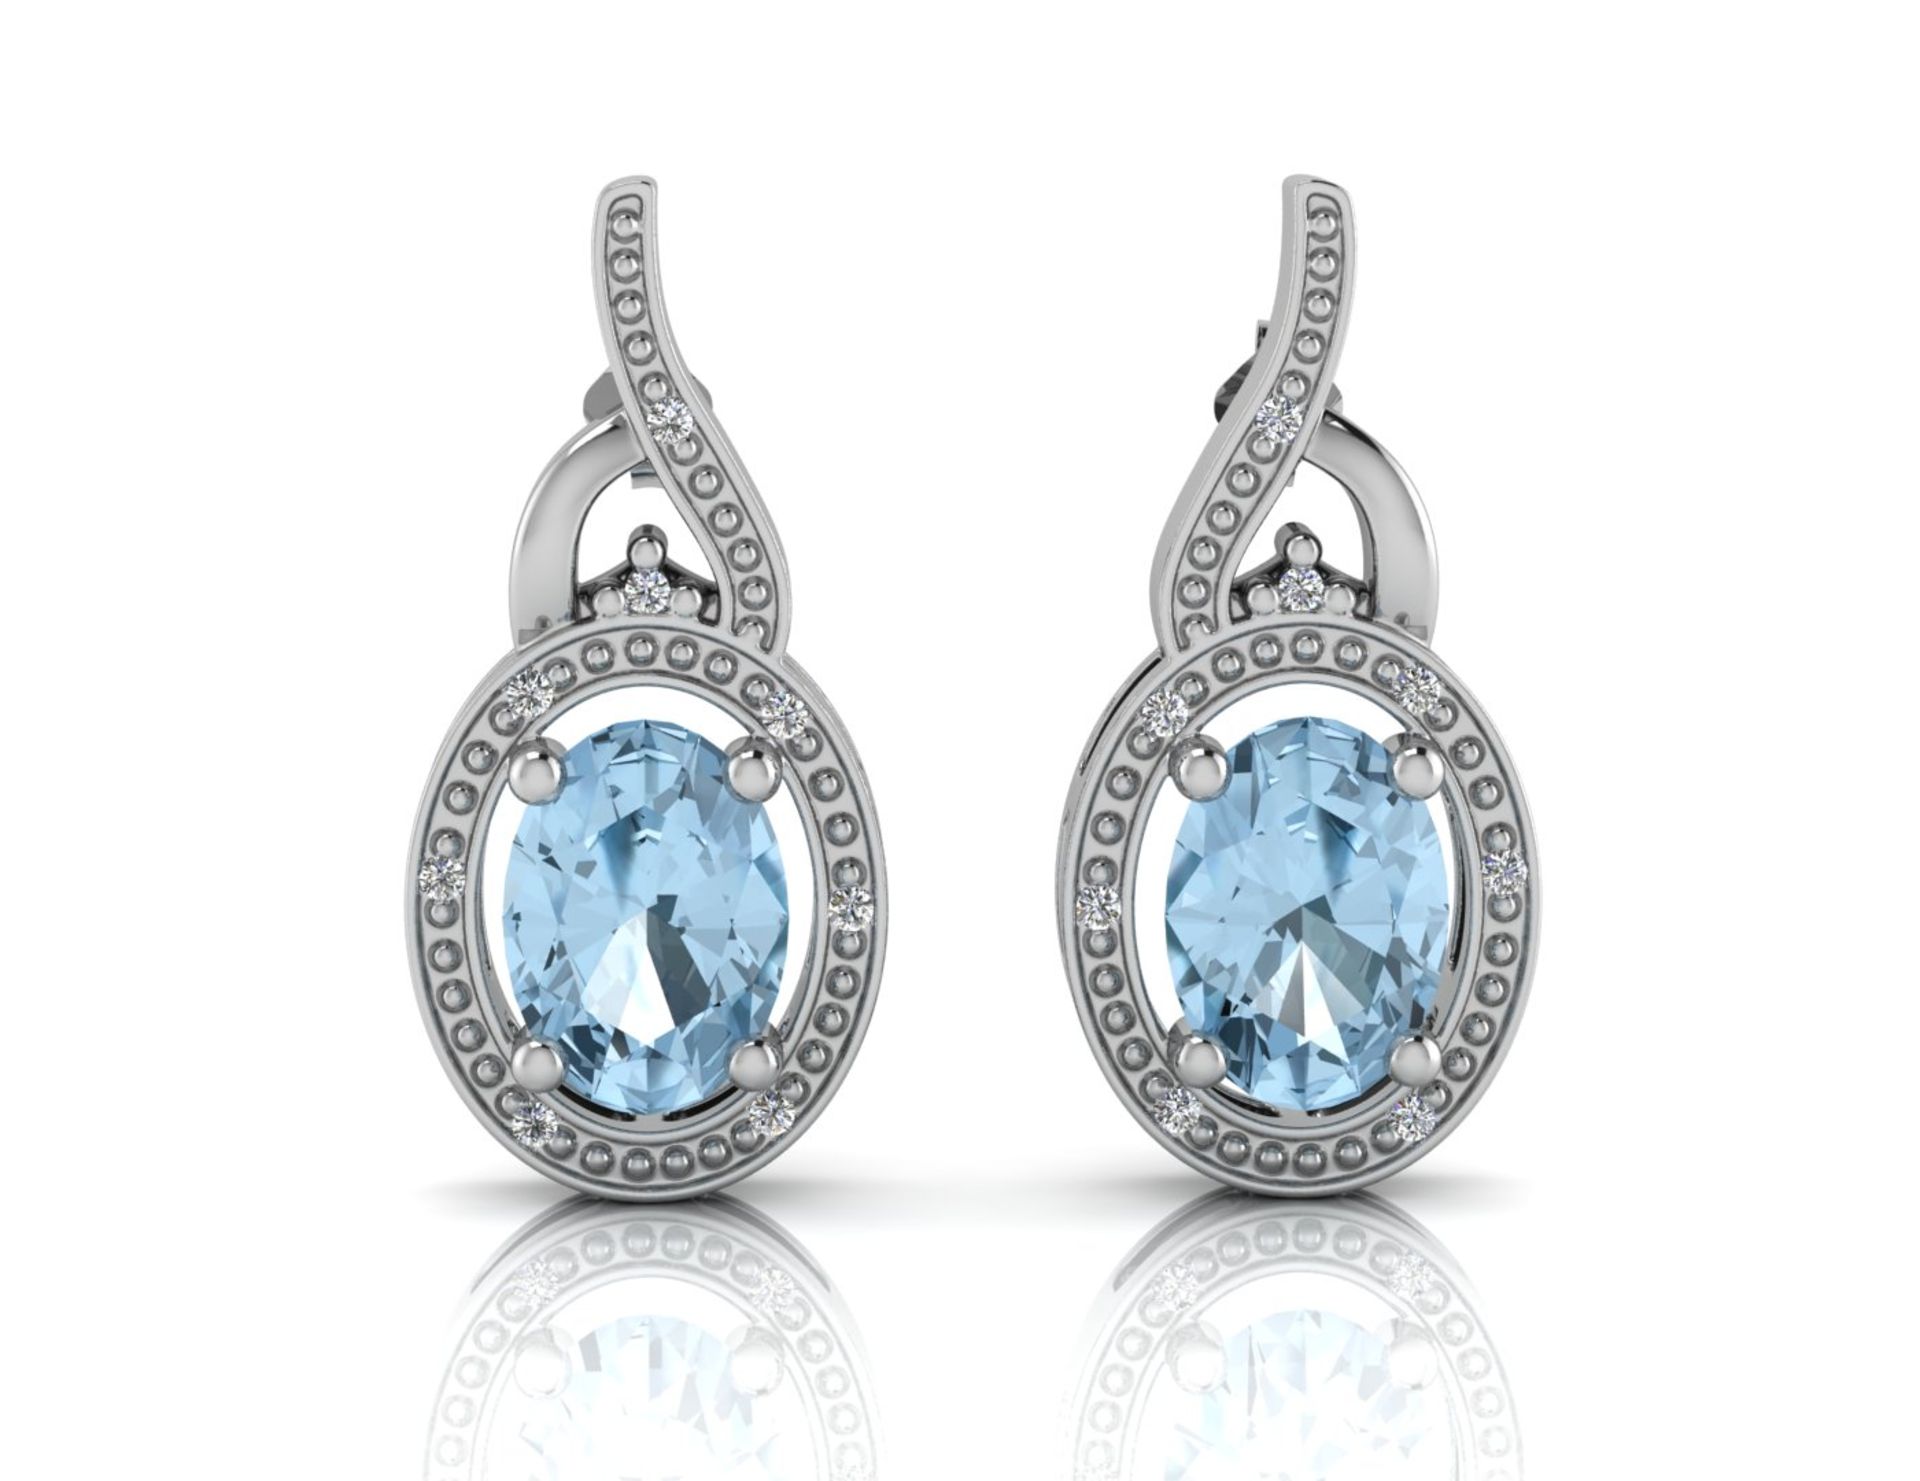 9ct White Gold Diamond And Blue Topaz Earring (BT1.69) 0.05 Carats - Valued By GIE £2,195.00 - A - Image 6 of 8